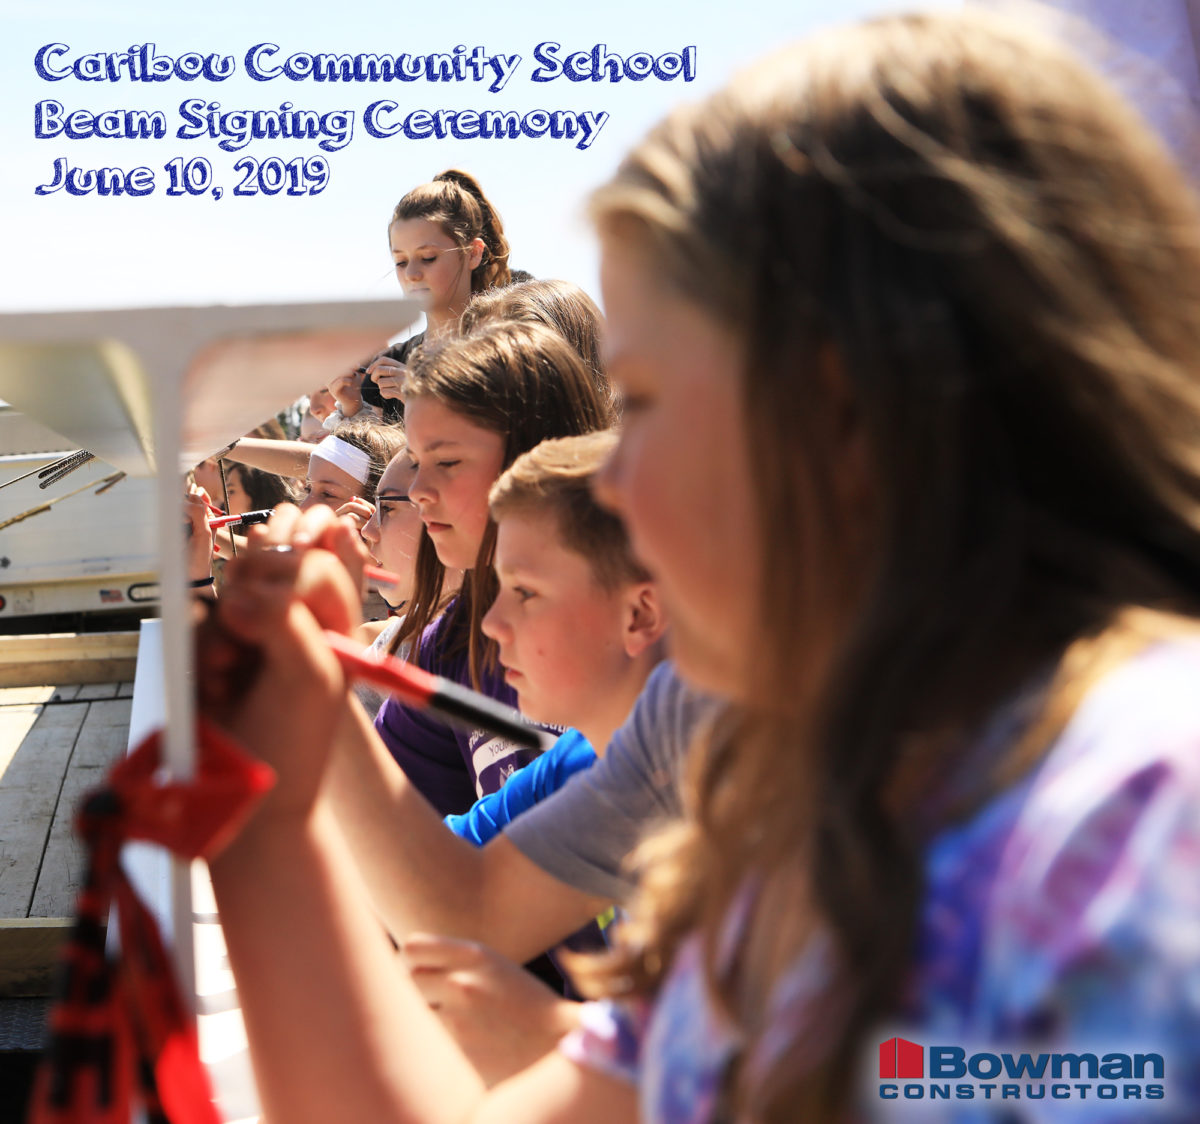 photo graphic of caribou community school beam signing ceremony june 10, 2019 students signing beam